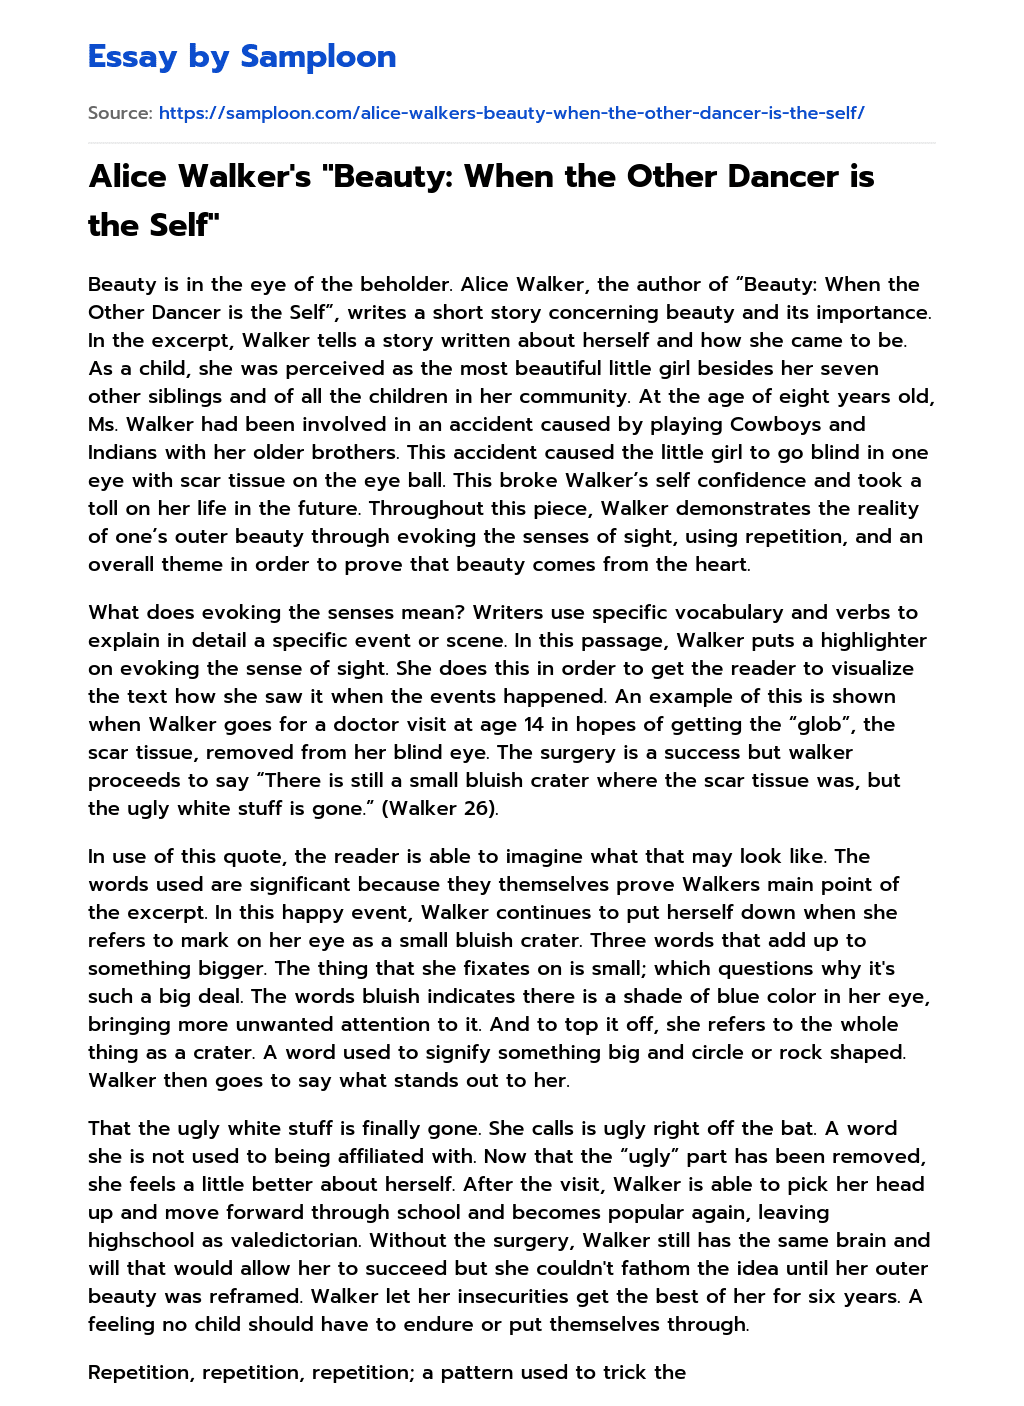 Alice Walker’s “Beauty: When the Other Dancer is the Self” Analytical Essay essay